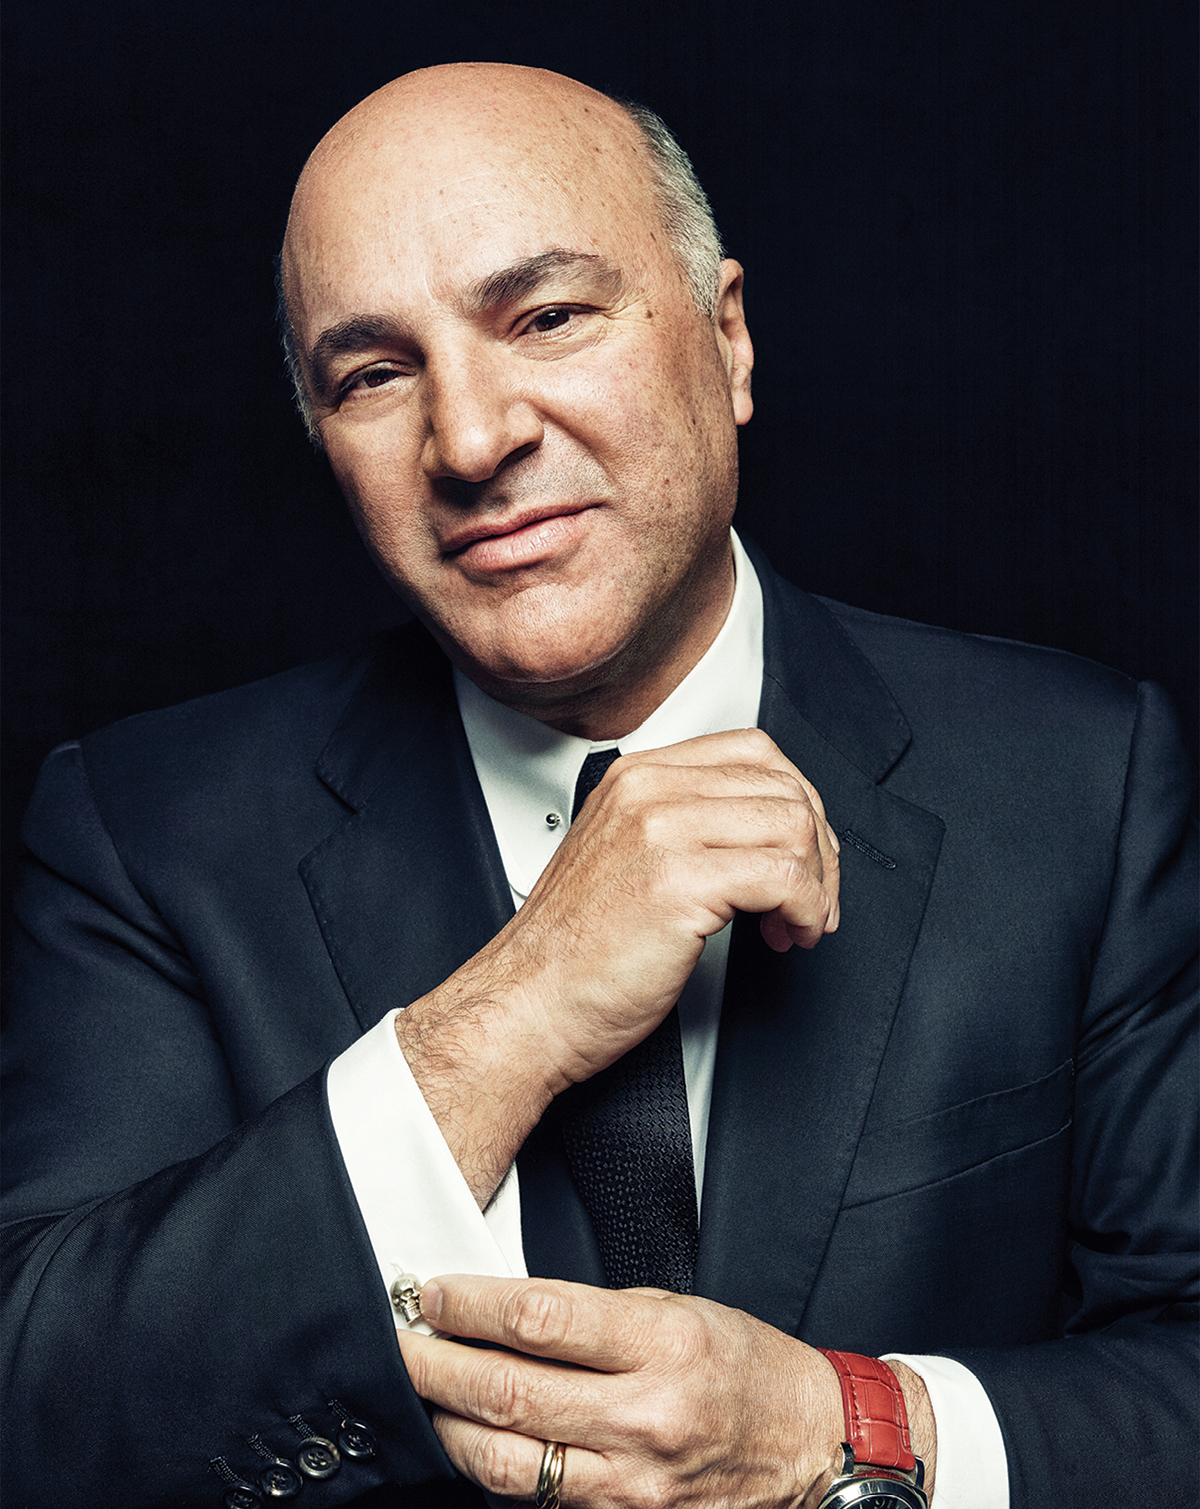 kevin o'leary boston interview